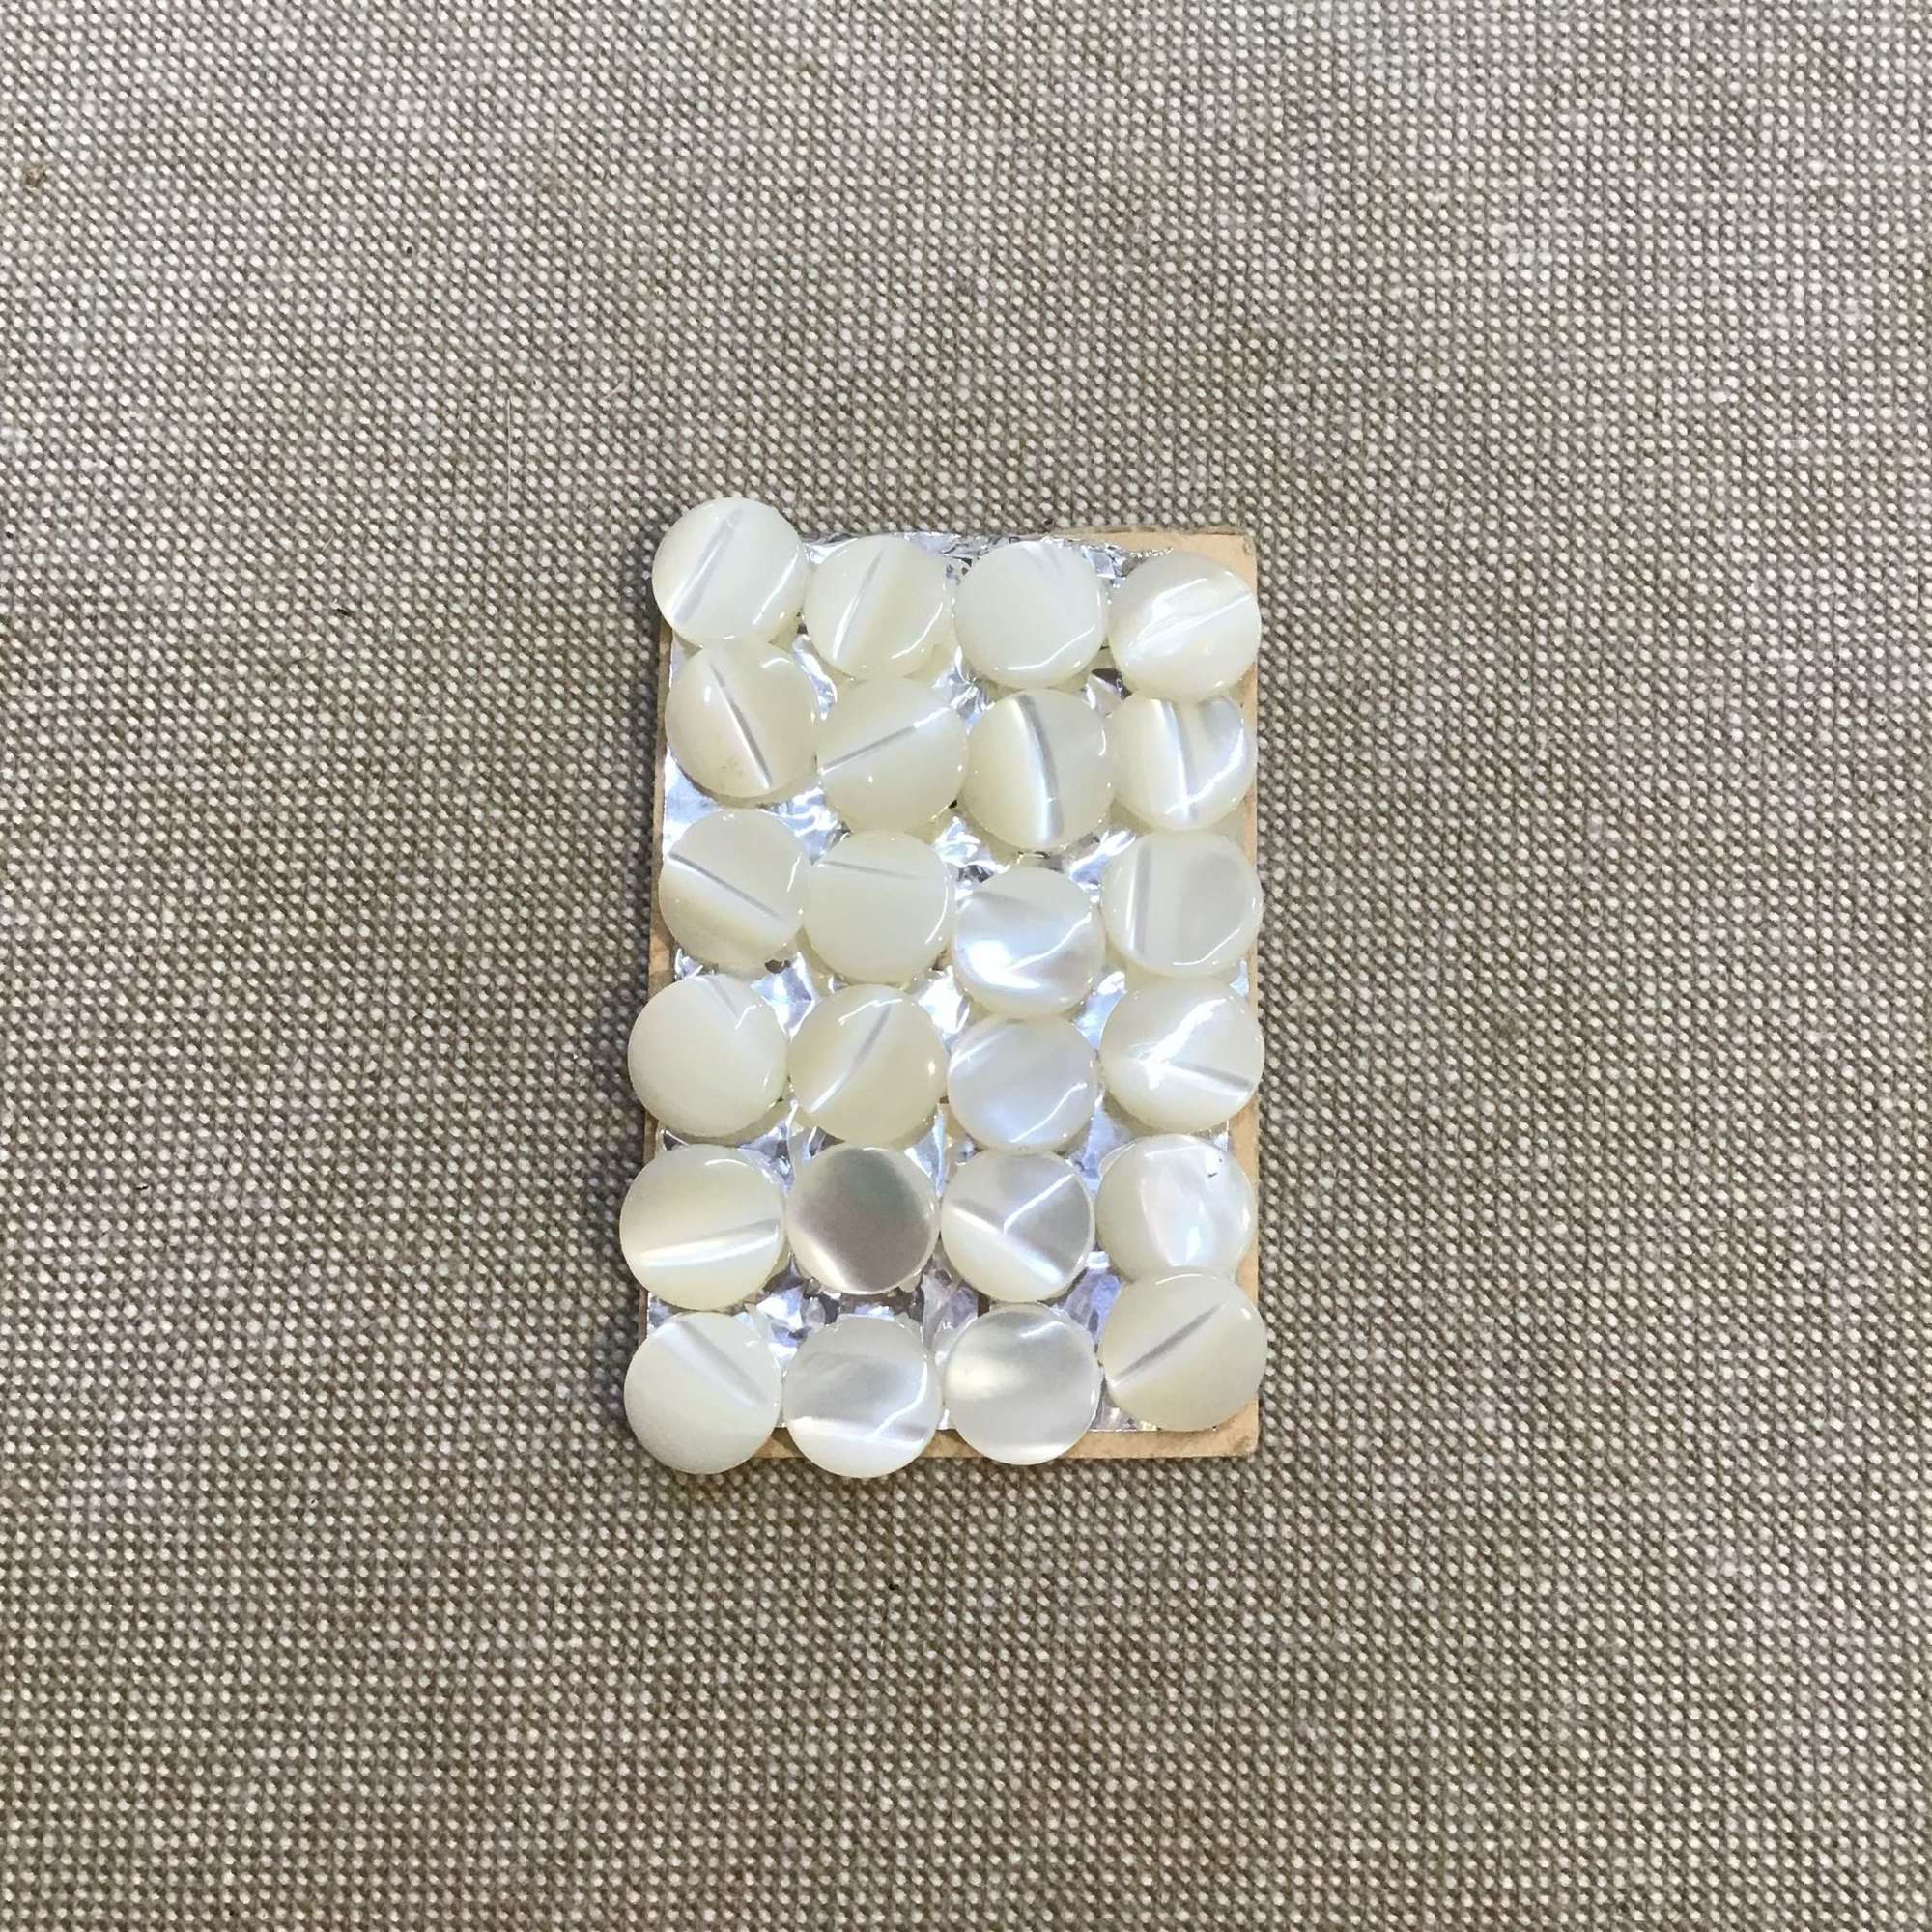 24 small mother of pearl buttons 0.7cm diameter